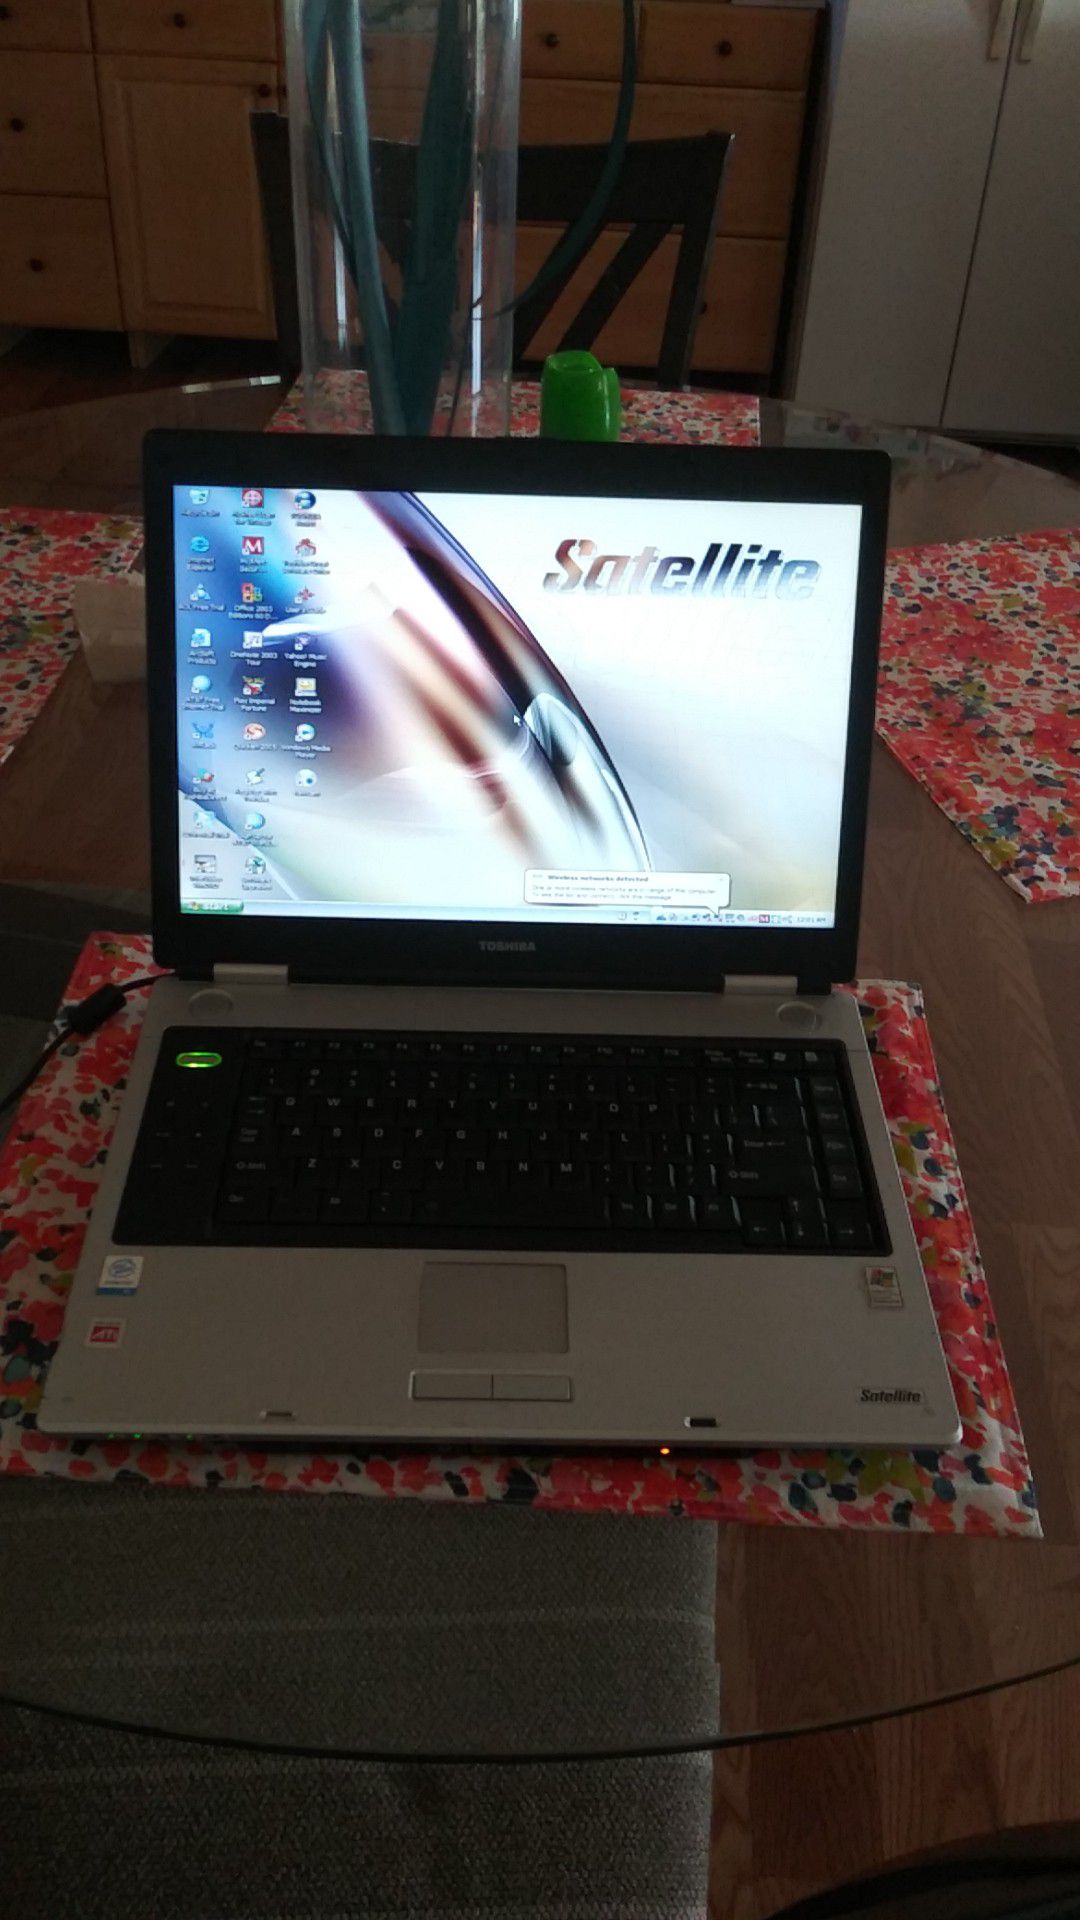 Toshiba laptop works good comes with power cord for sale $80 or trades are welcome